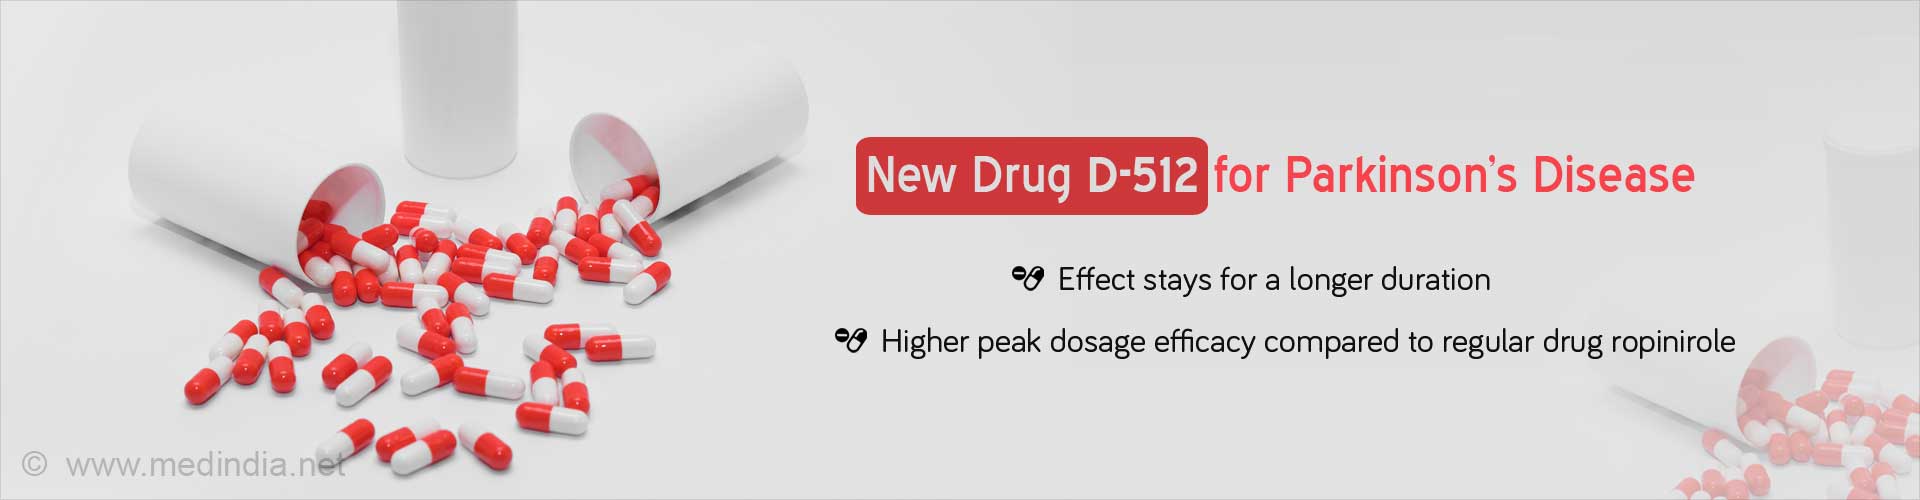 New Drug D-512 for Parkinson's Disease
- Effect stays on for a longer duration
- Higher peak dosage efficacy compared to regular drug ropinirole